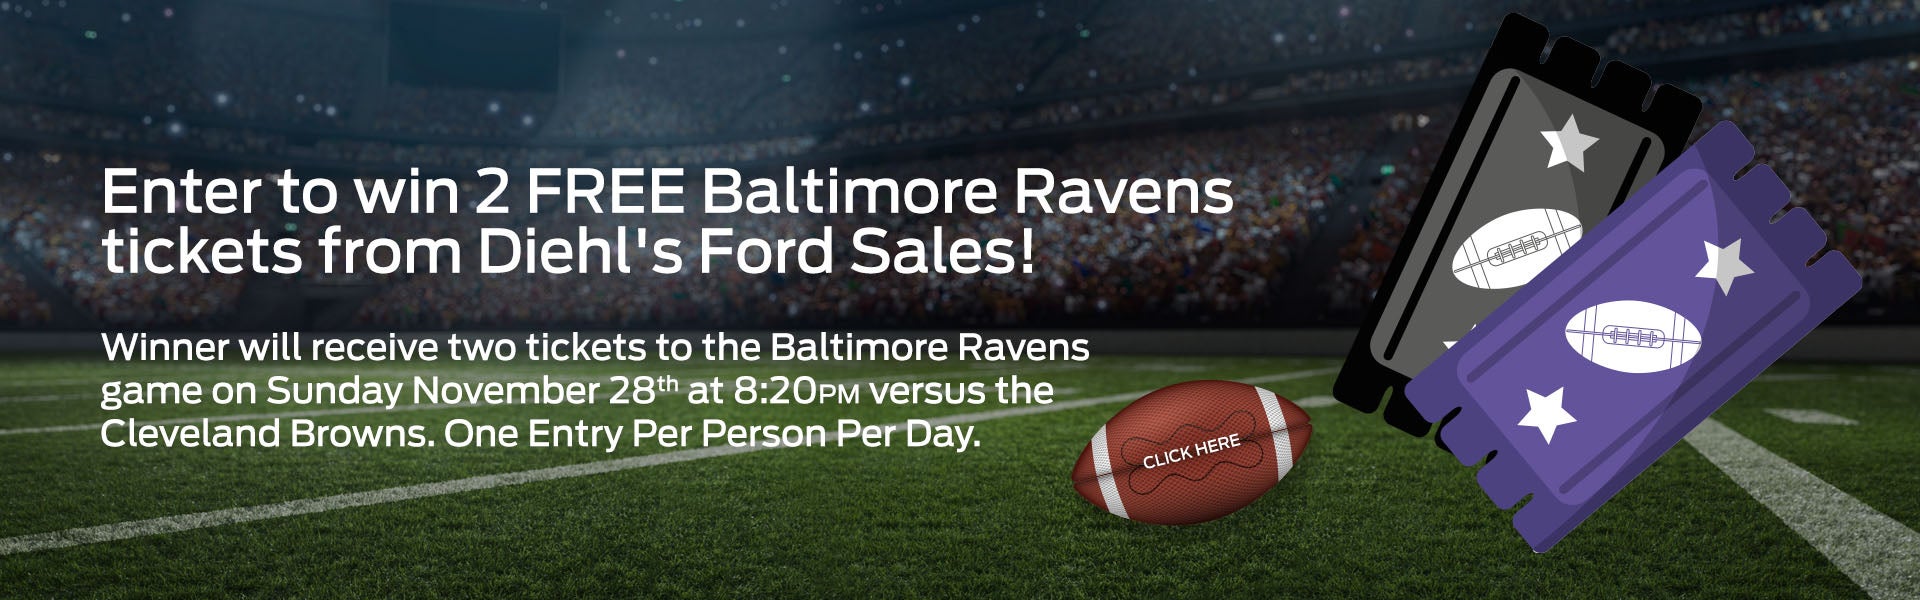 Ravens Tickets Giveaway 